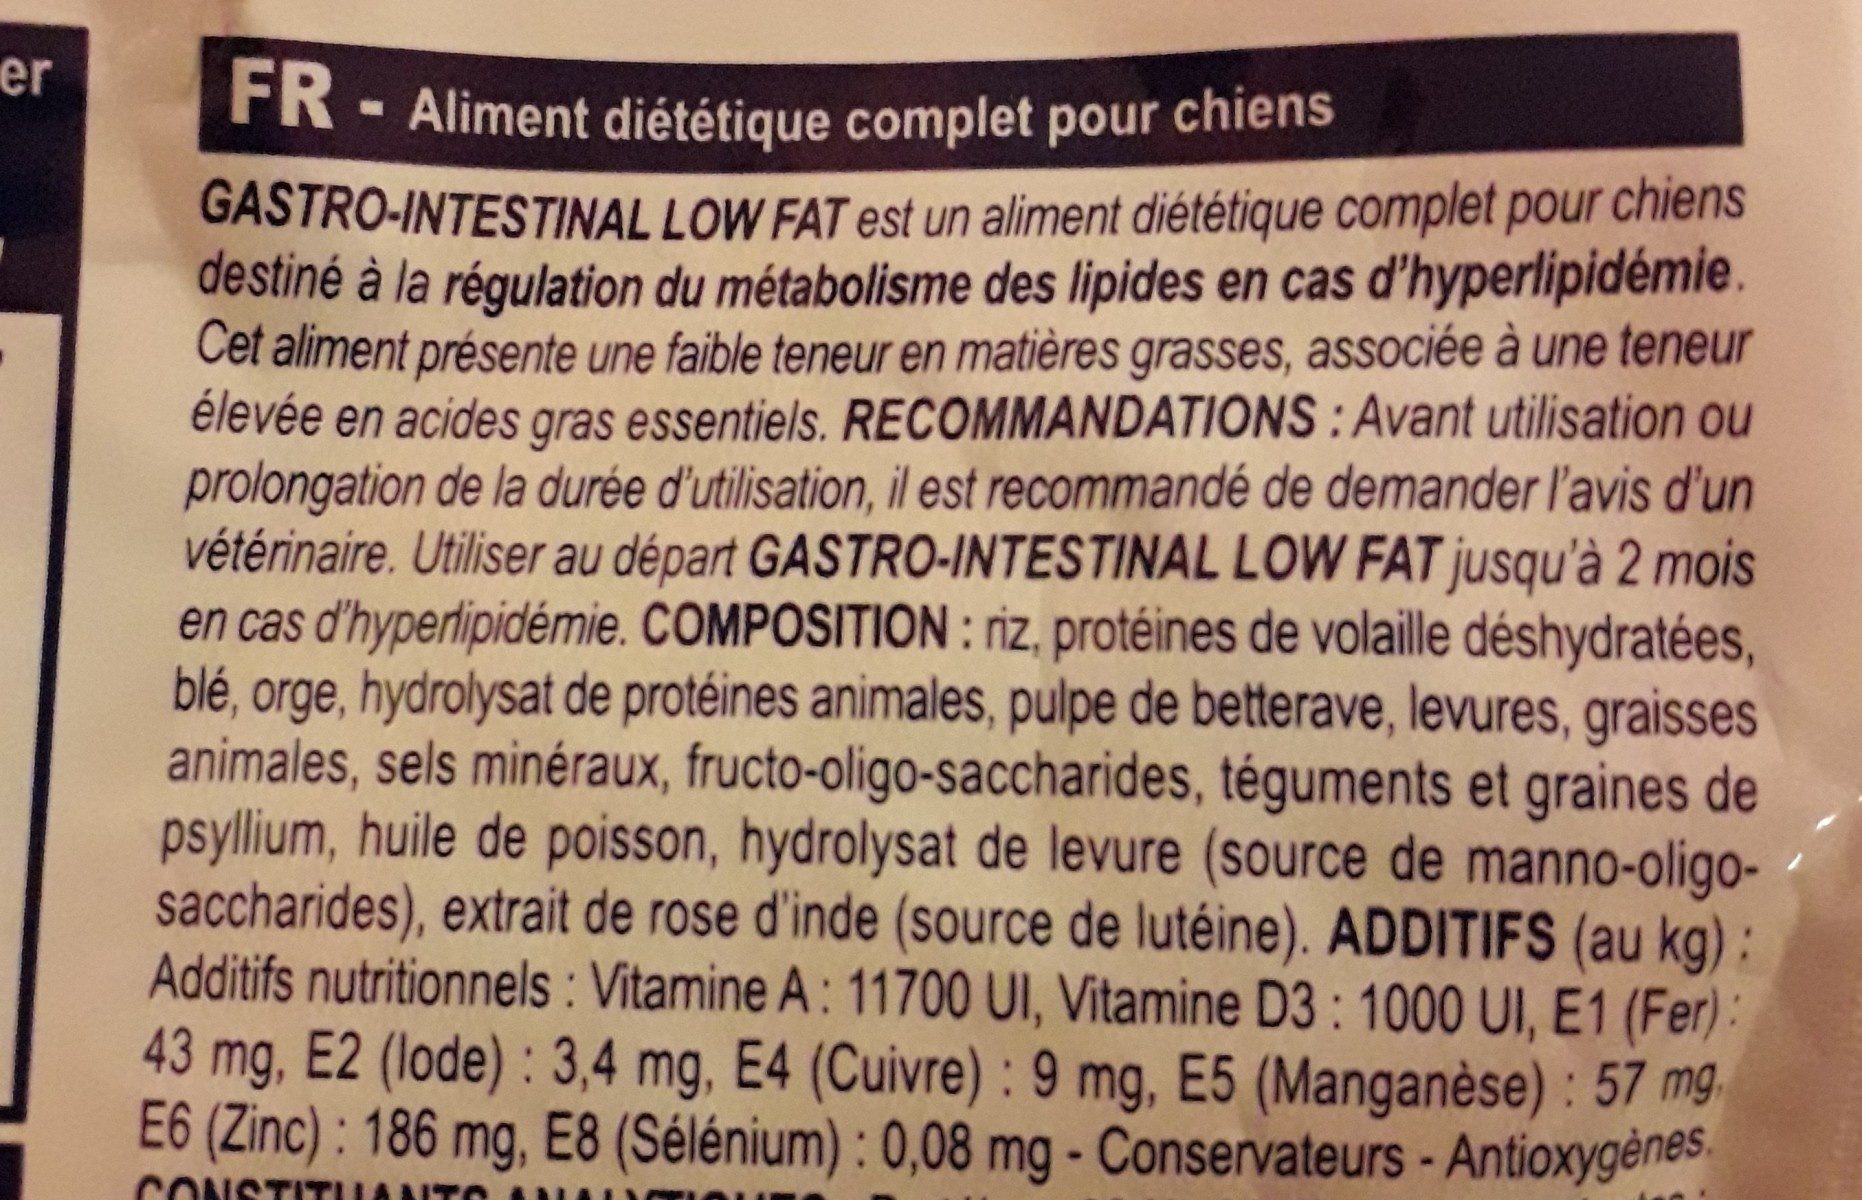 Royal Canin Veterinary - Gastro Intestinal Low Fat Chien LF 22 - Ingredients - fr